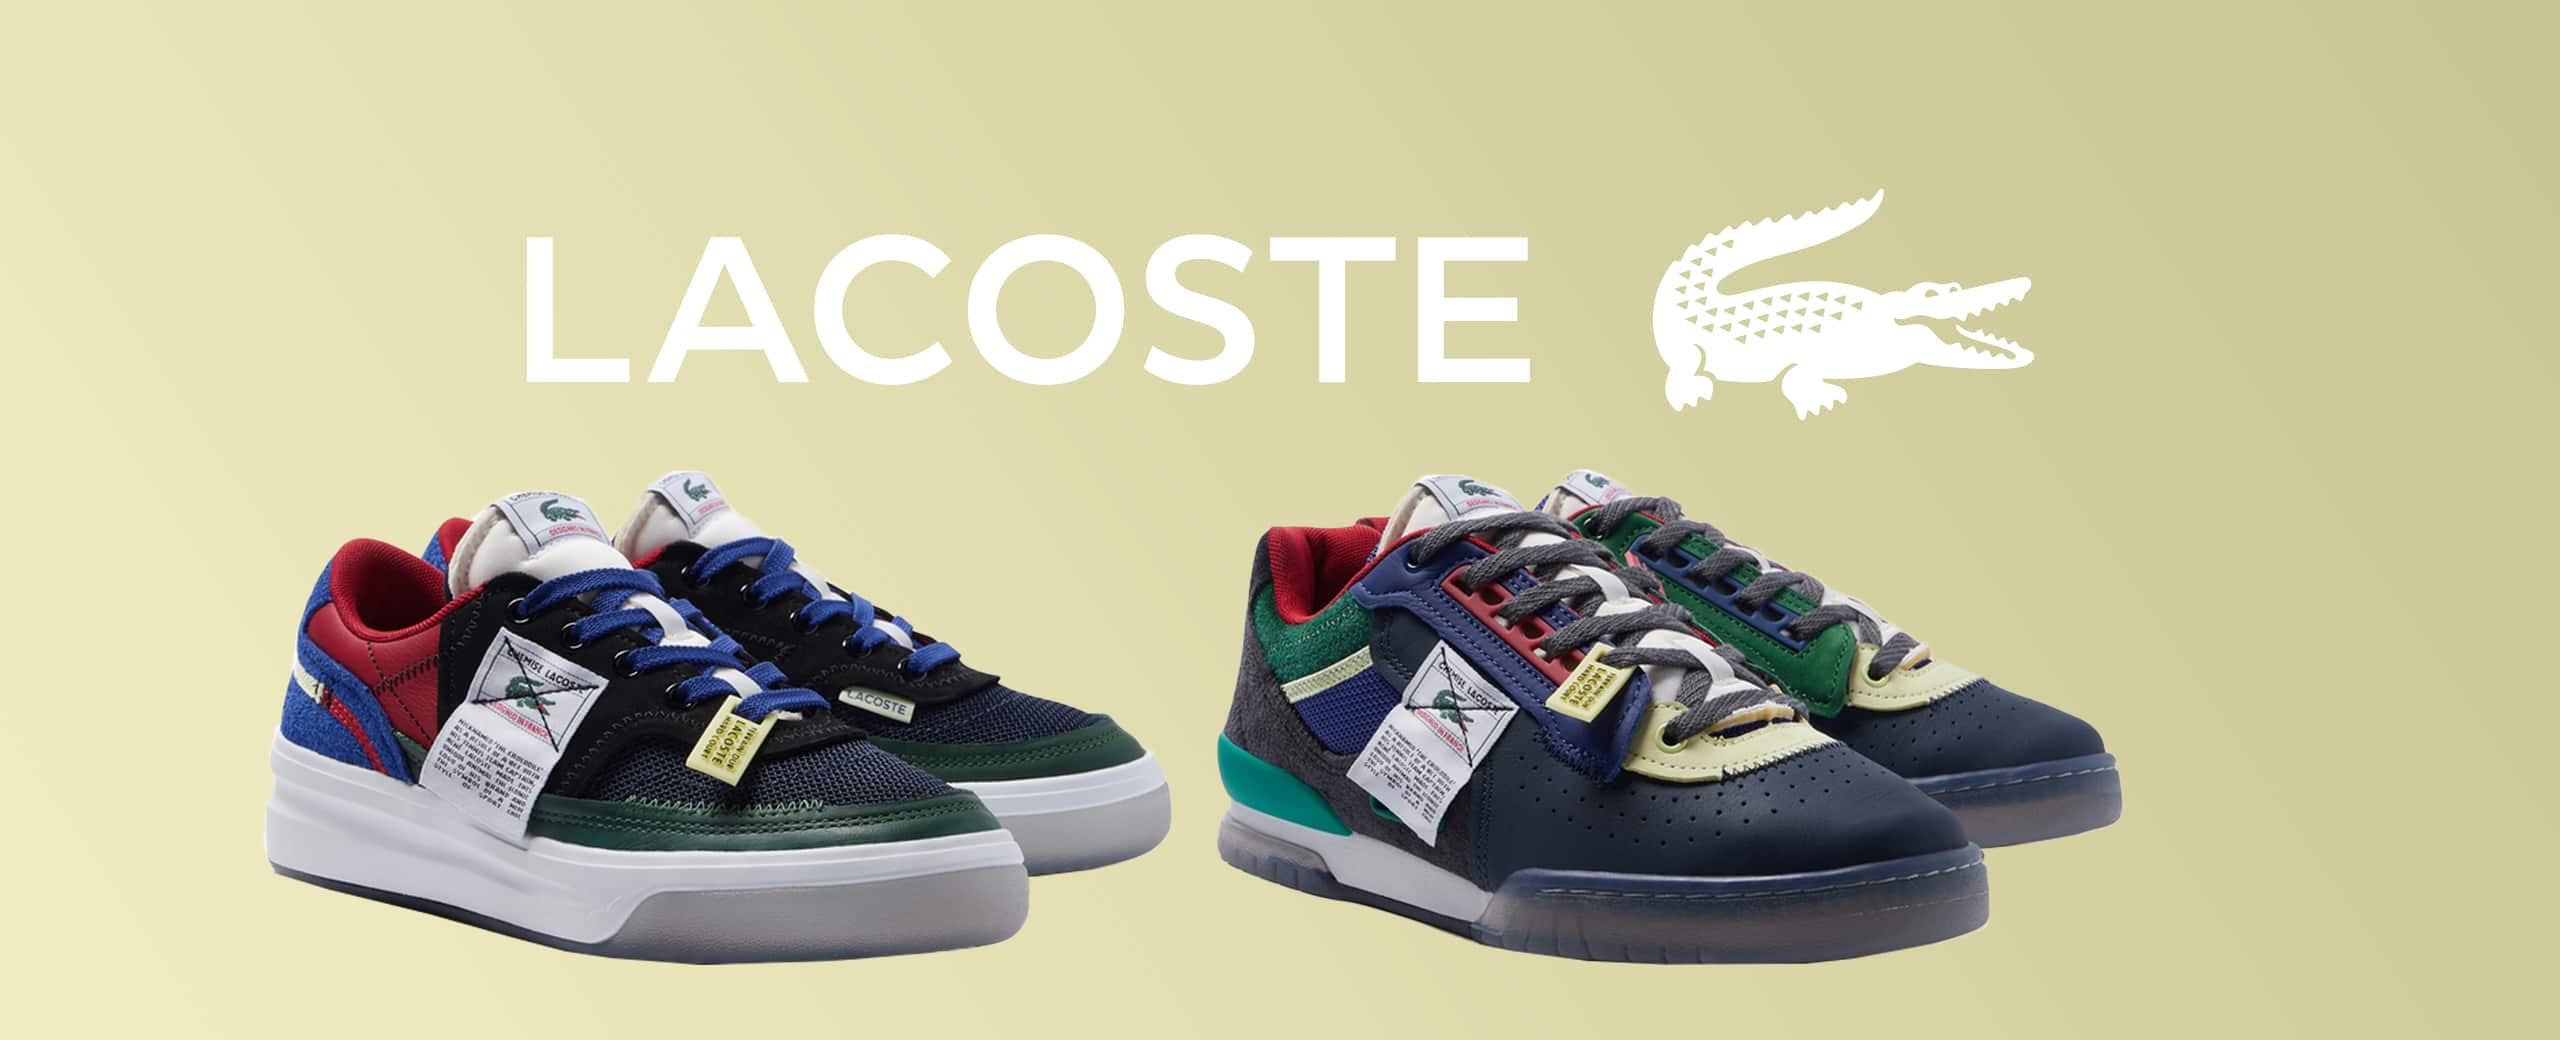 "LACOSTE "The Patchwork Pack""